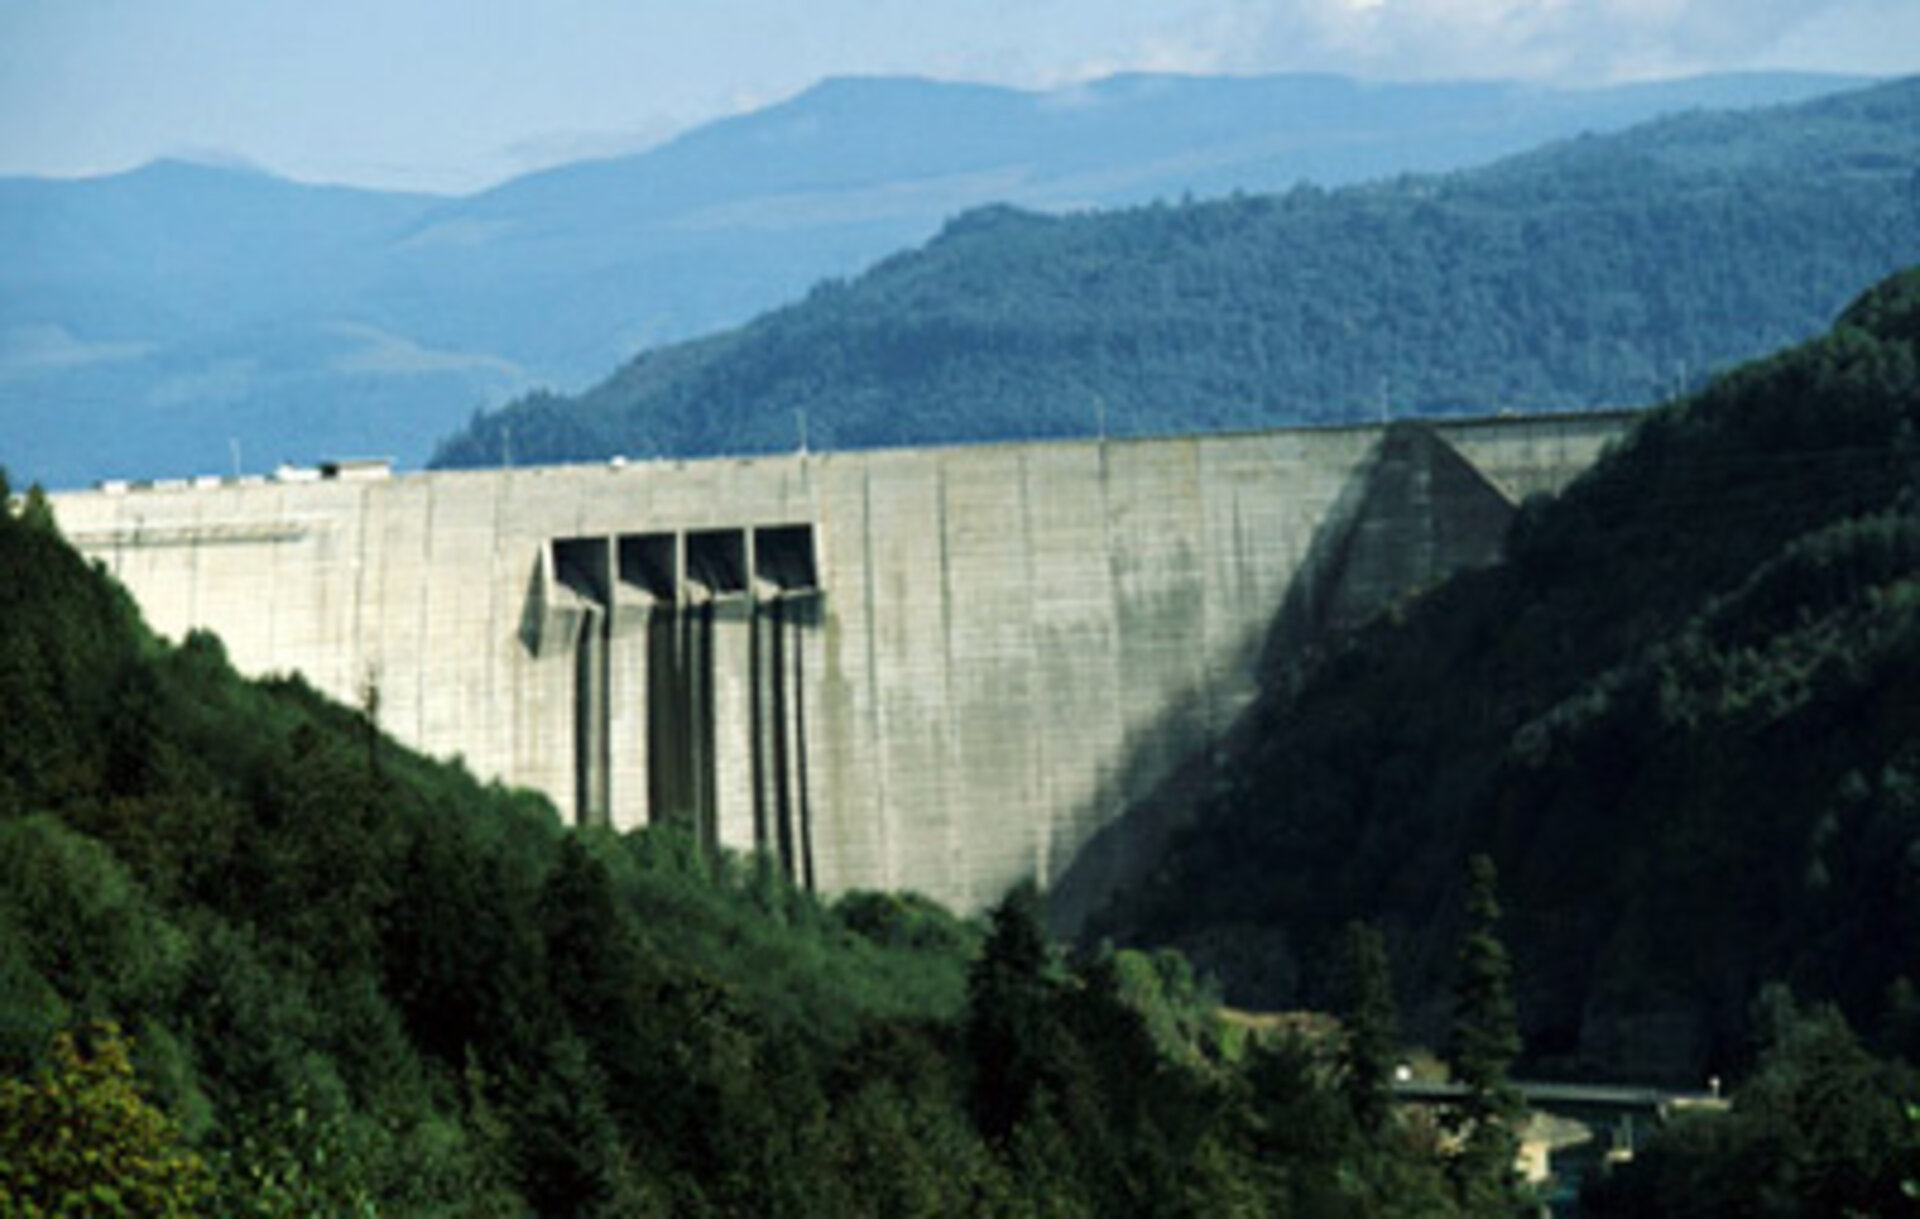 Hydropower is the leading renewable energy source